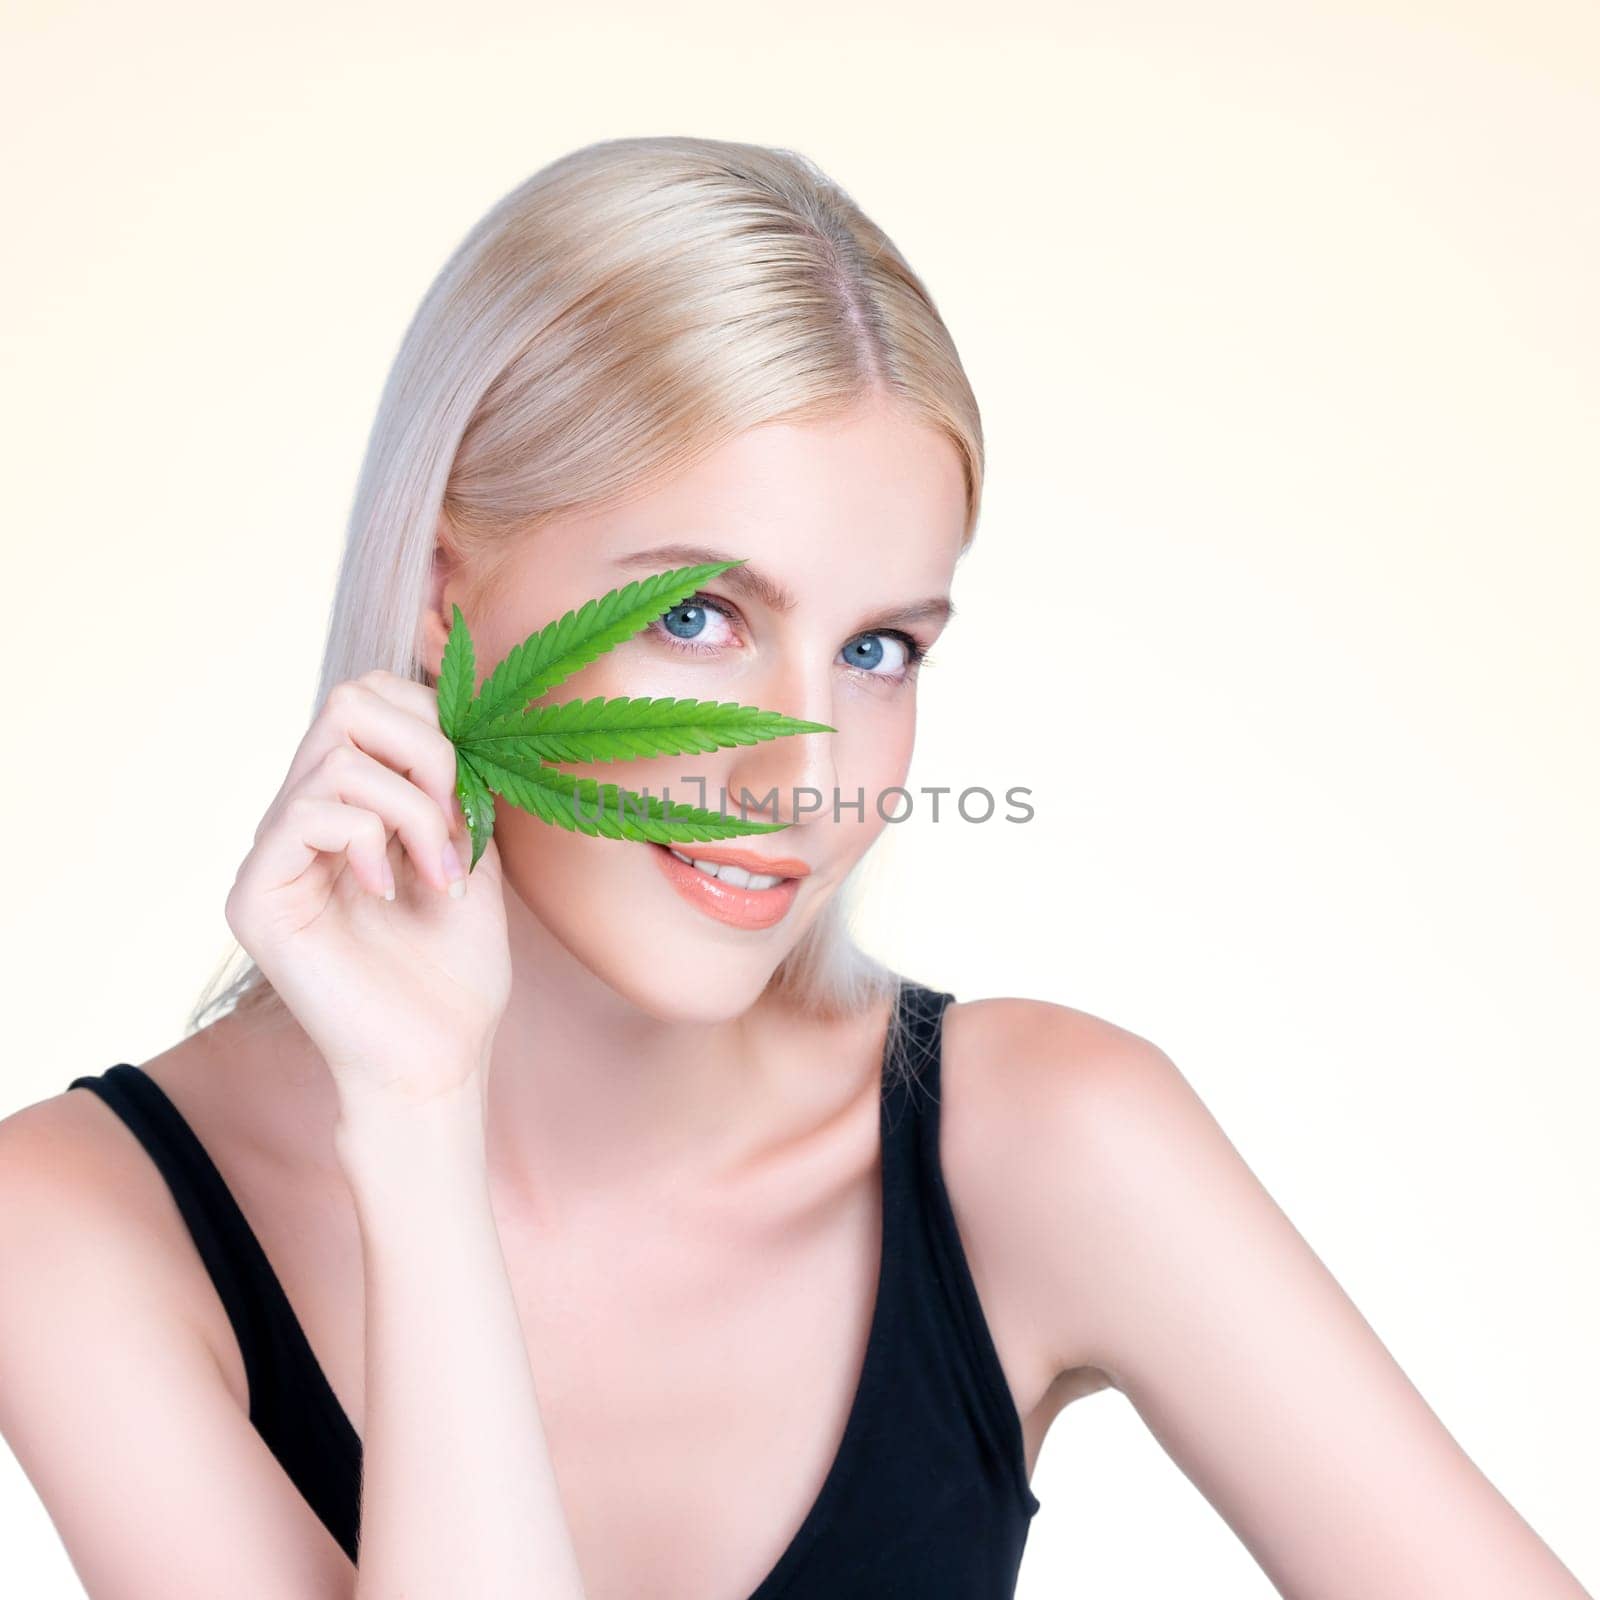 Personable white blond hair woman holding CBD leaf in isolated background. by biancoblue